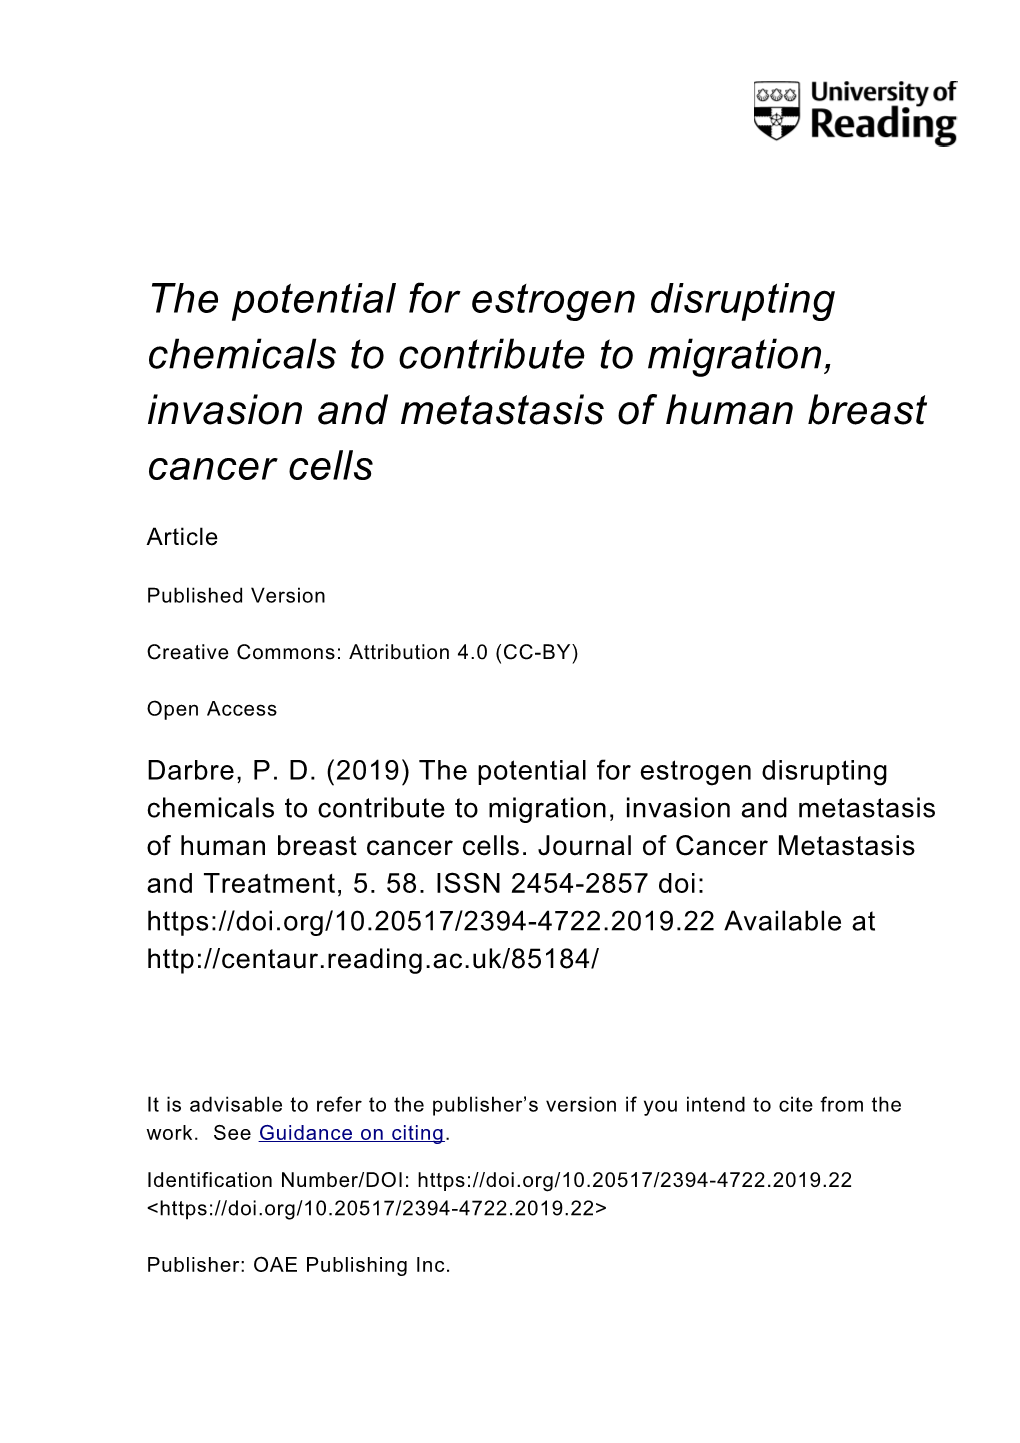 The Potential for Estrogen Disrupting Chemicals to Contribute to Migration, Invasion and Metastasis of Human Breast Cancer Cells